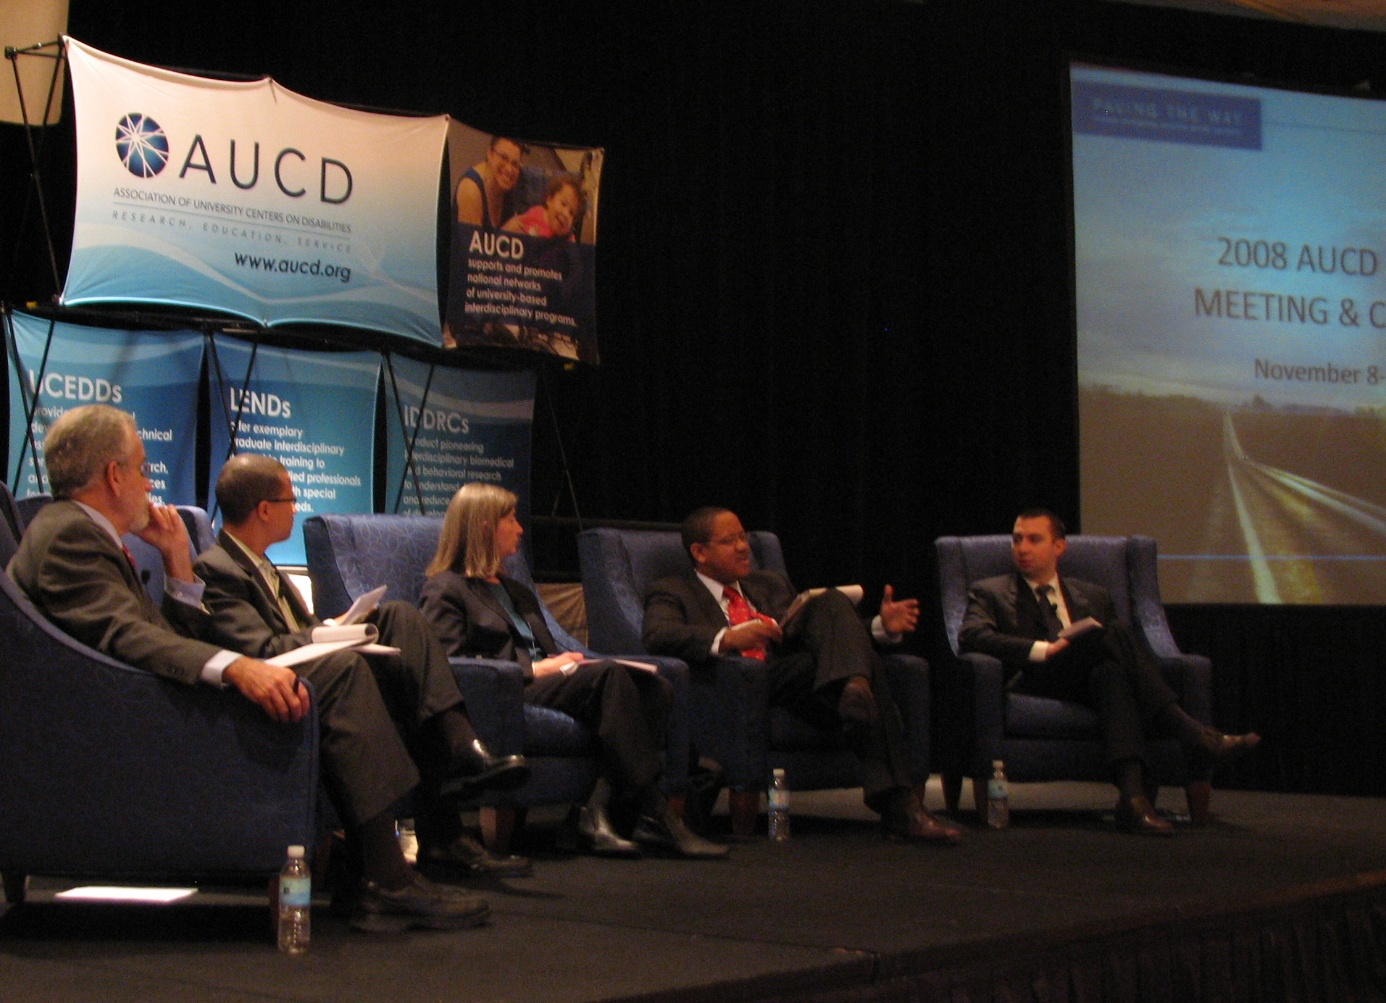 Michael Strautmanis speaks at 2008 AUCD Annual Meeting and Conference in Washington, DC